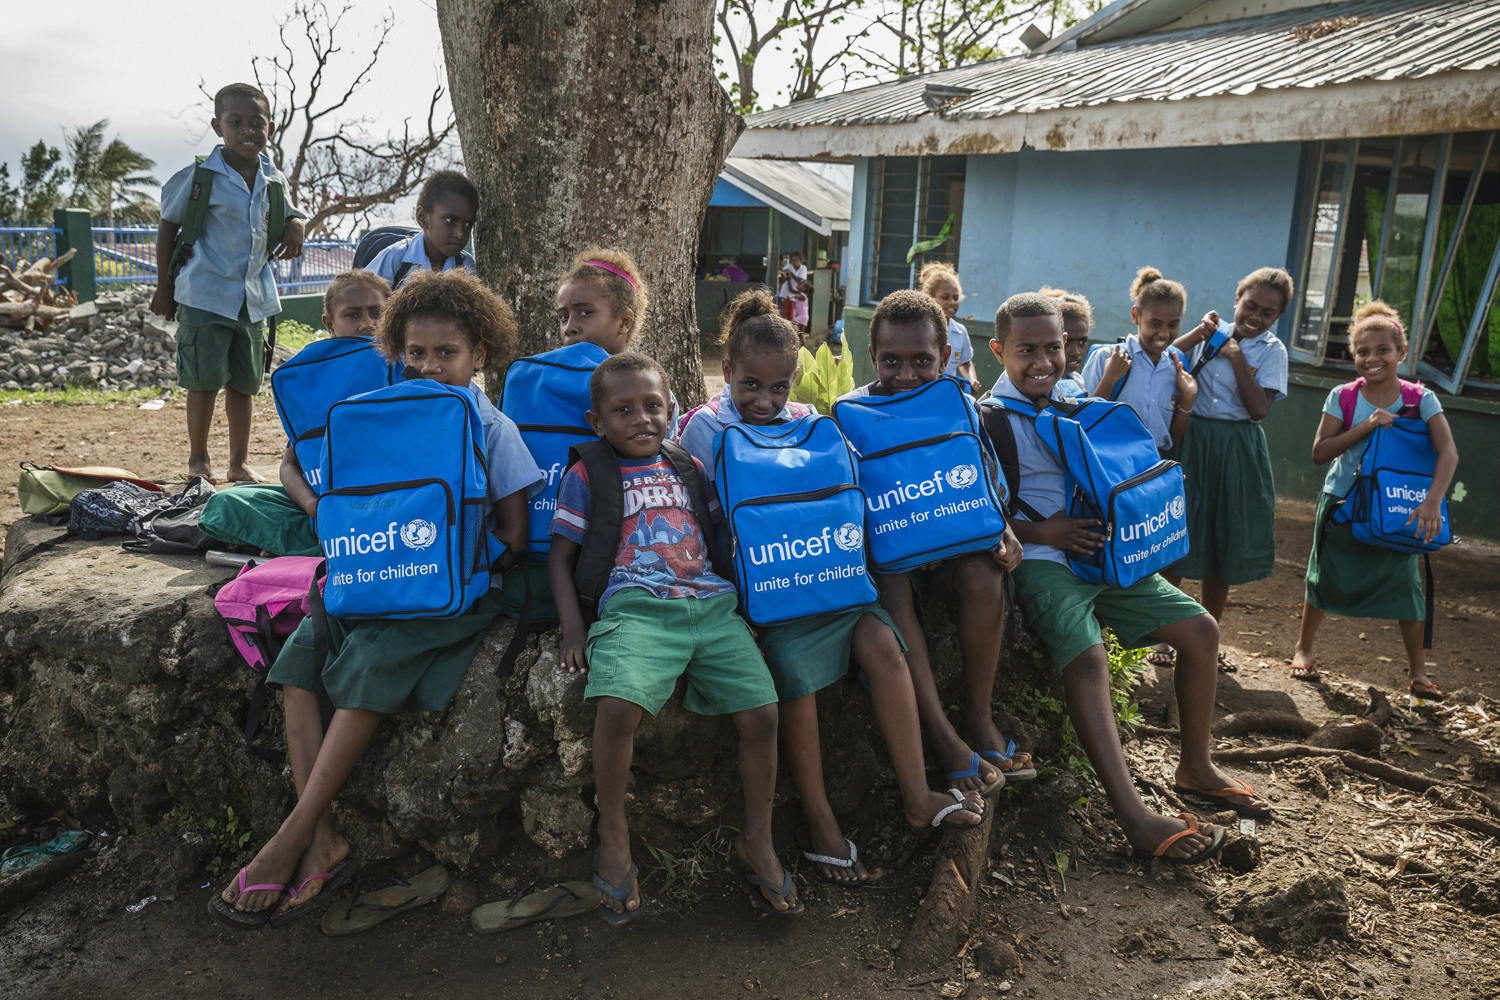 Children proudly hold their new school bags. After a disturbing event like Cyclone Pam it's important to get children back to learning and playing as soon as possible.